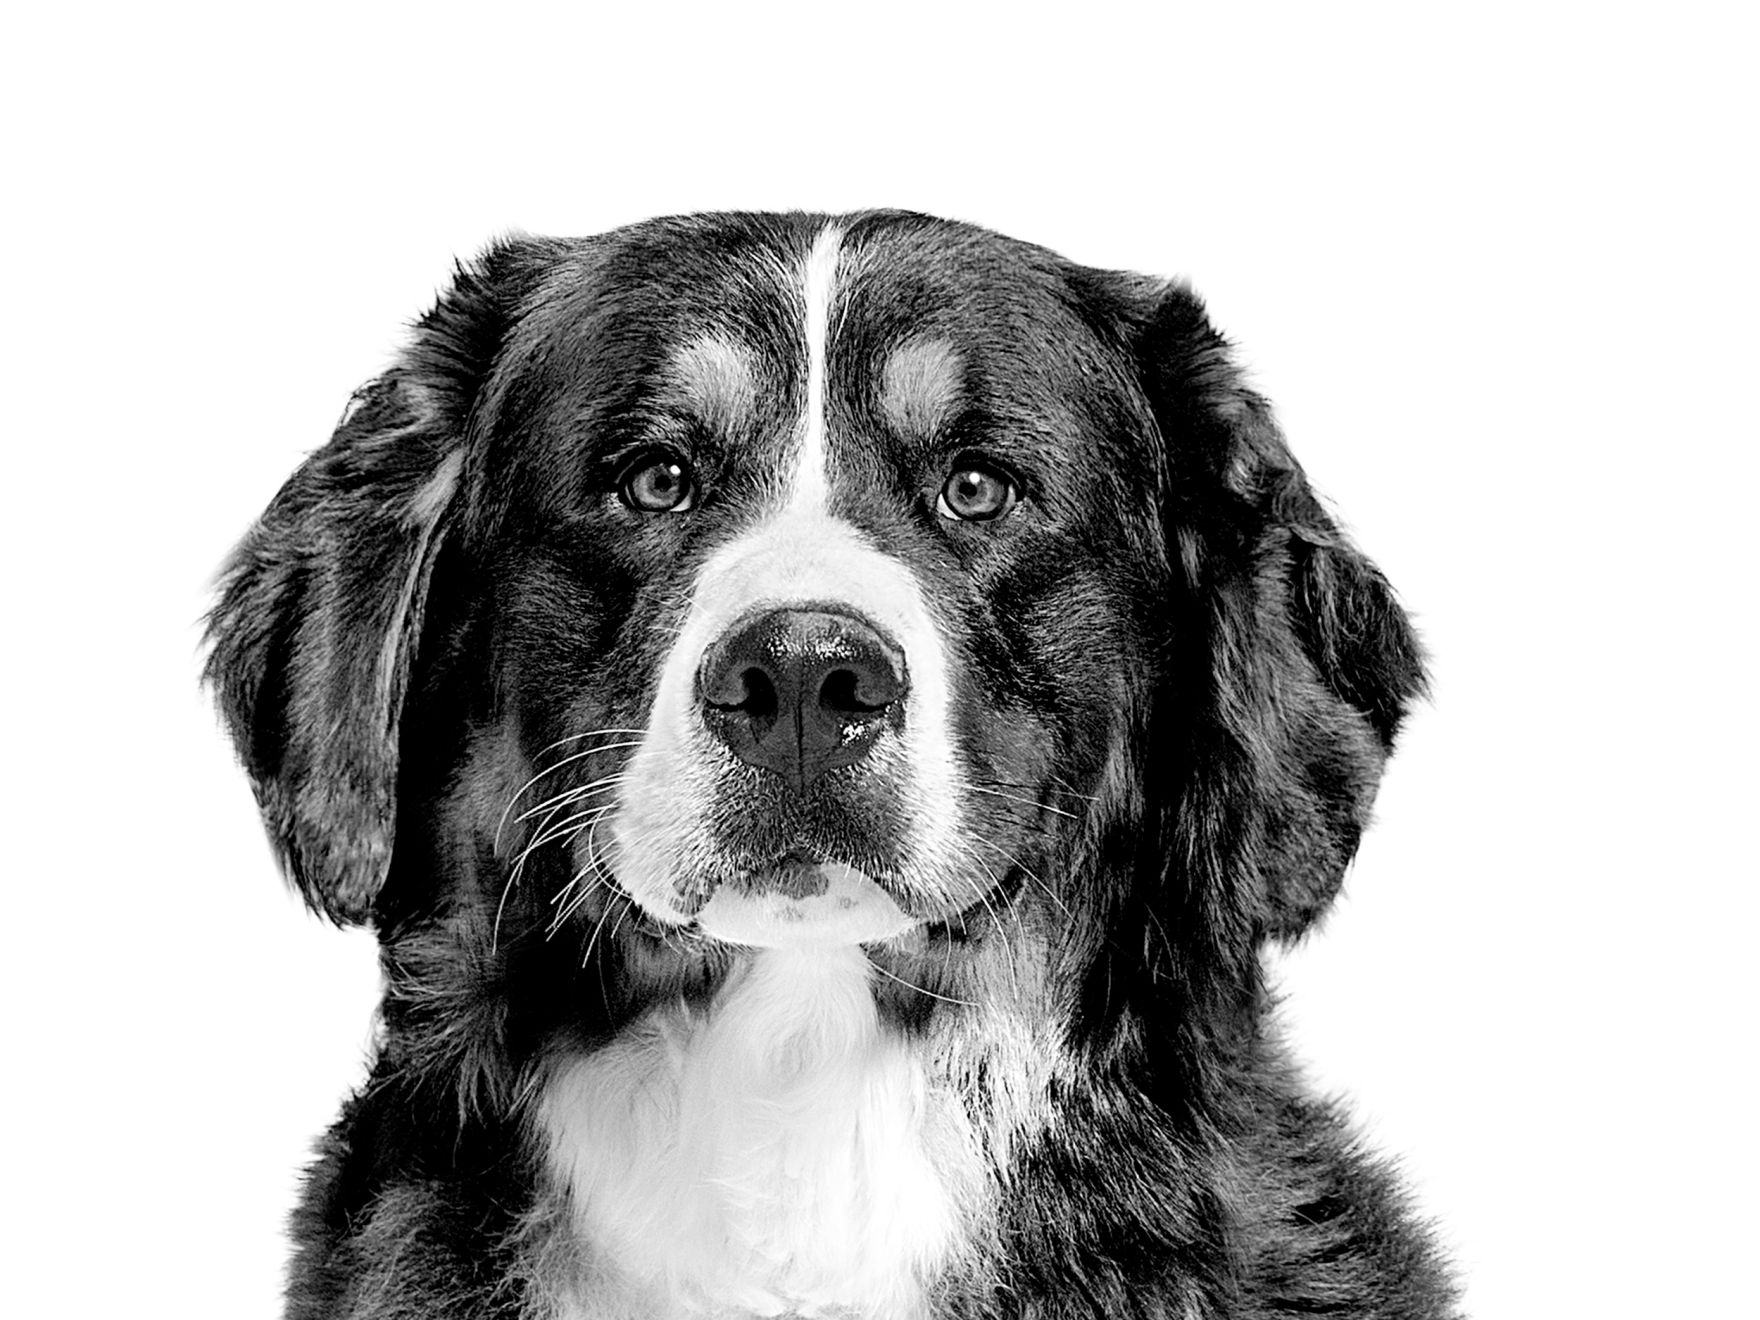 Dog in black and white